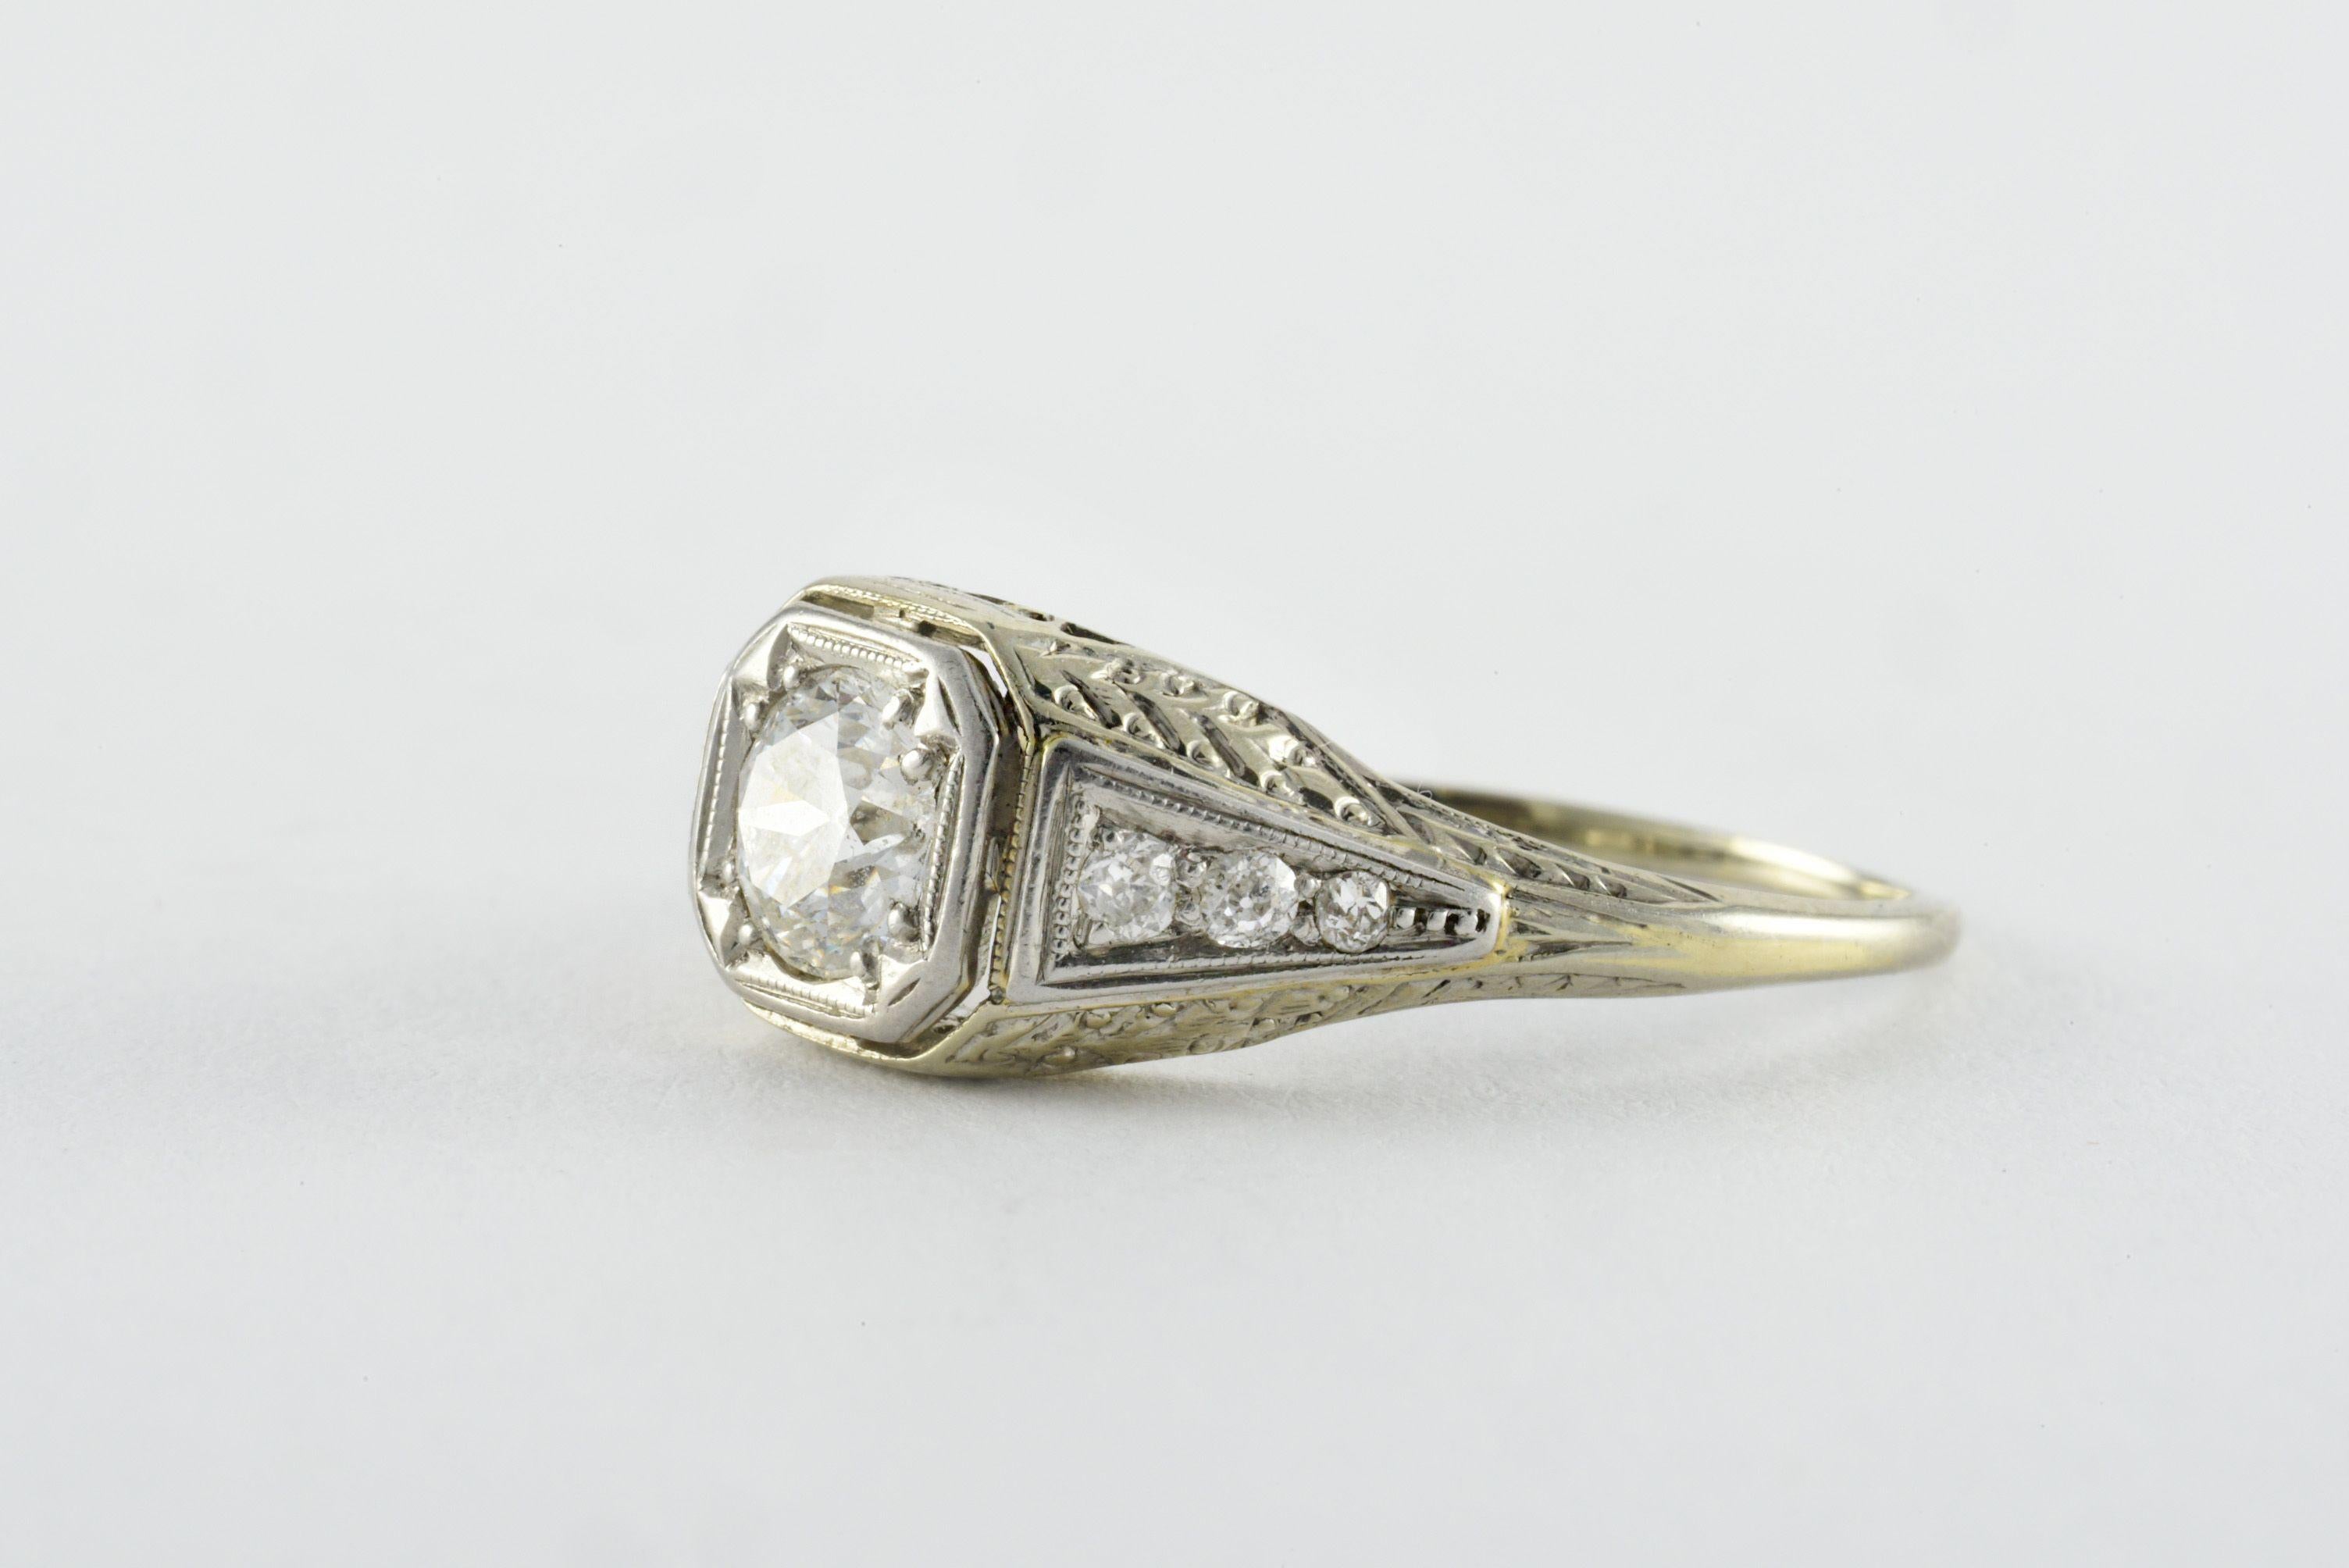 Crafted in the 1920s from 14-18kt white gold, this Art Deco band features an Old European cut diamond measuring approximately 0.65 carats, F color, I1 clarity and embellished with six smaller Old Mine cut diamonds on the shoulders totaling